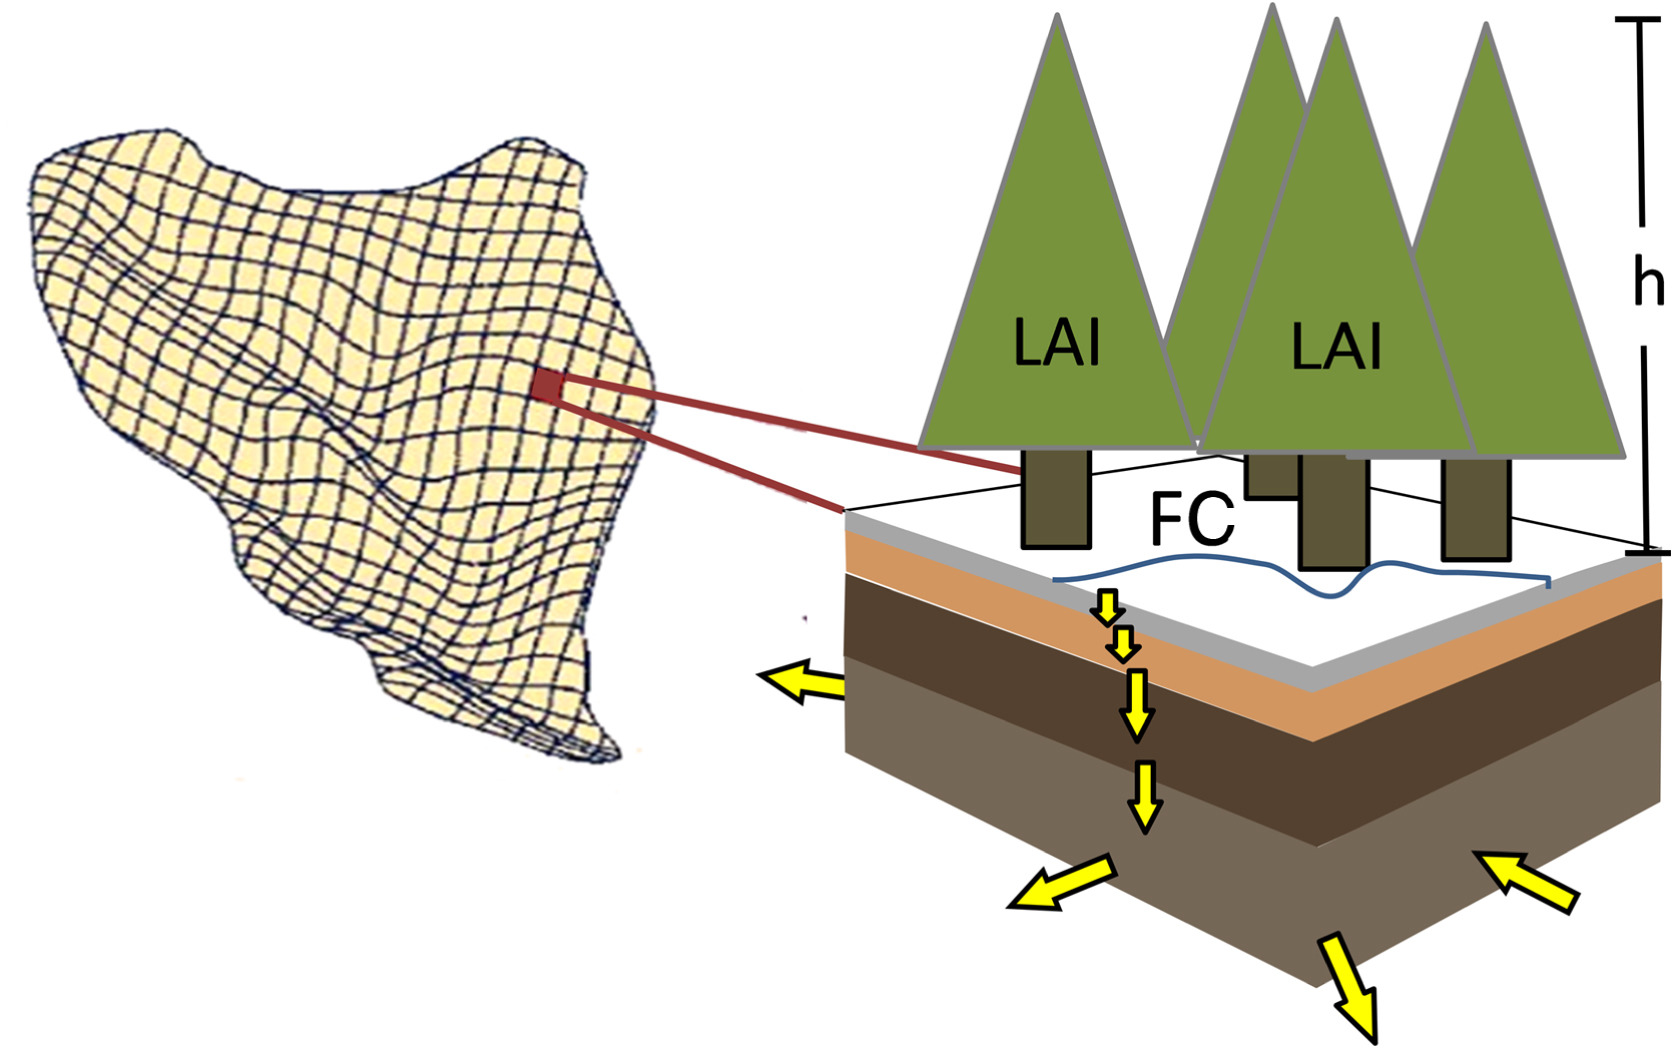 A simple computer drawing showing layers of soil under evergreen trees and a net to symbolize data capture.